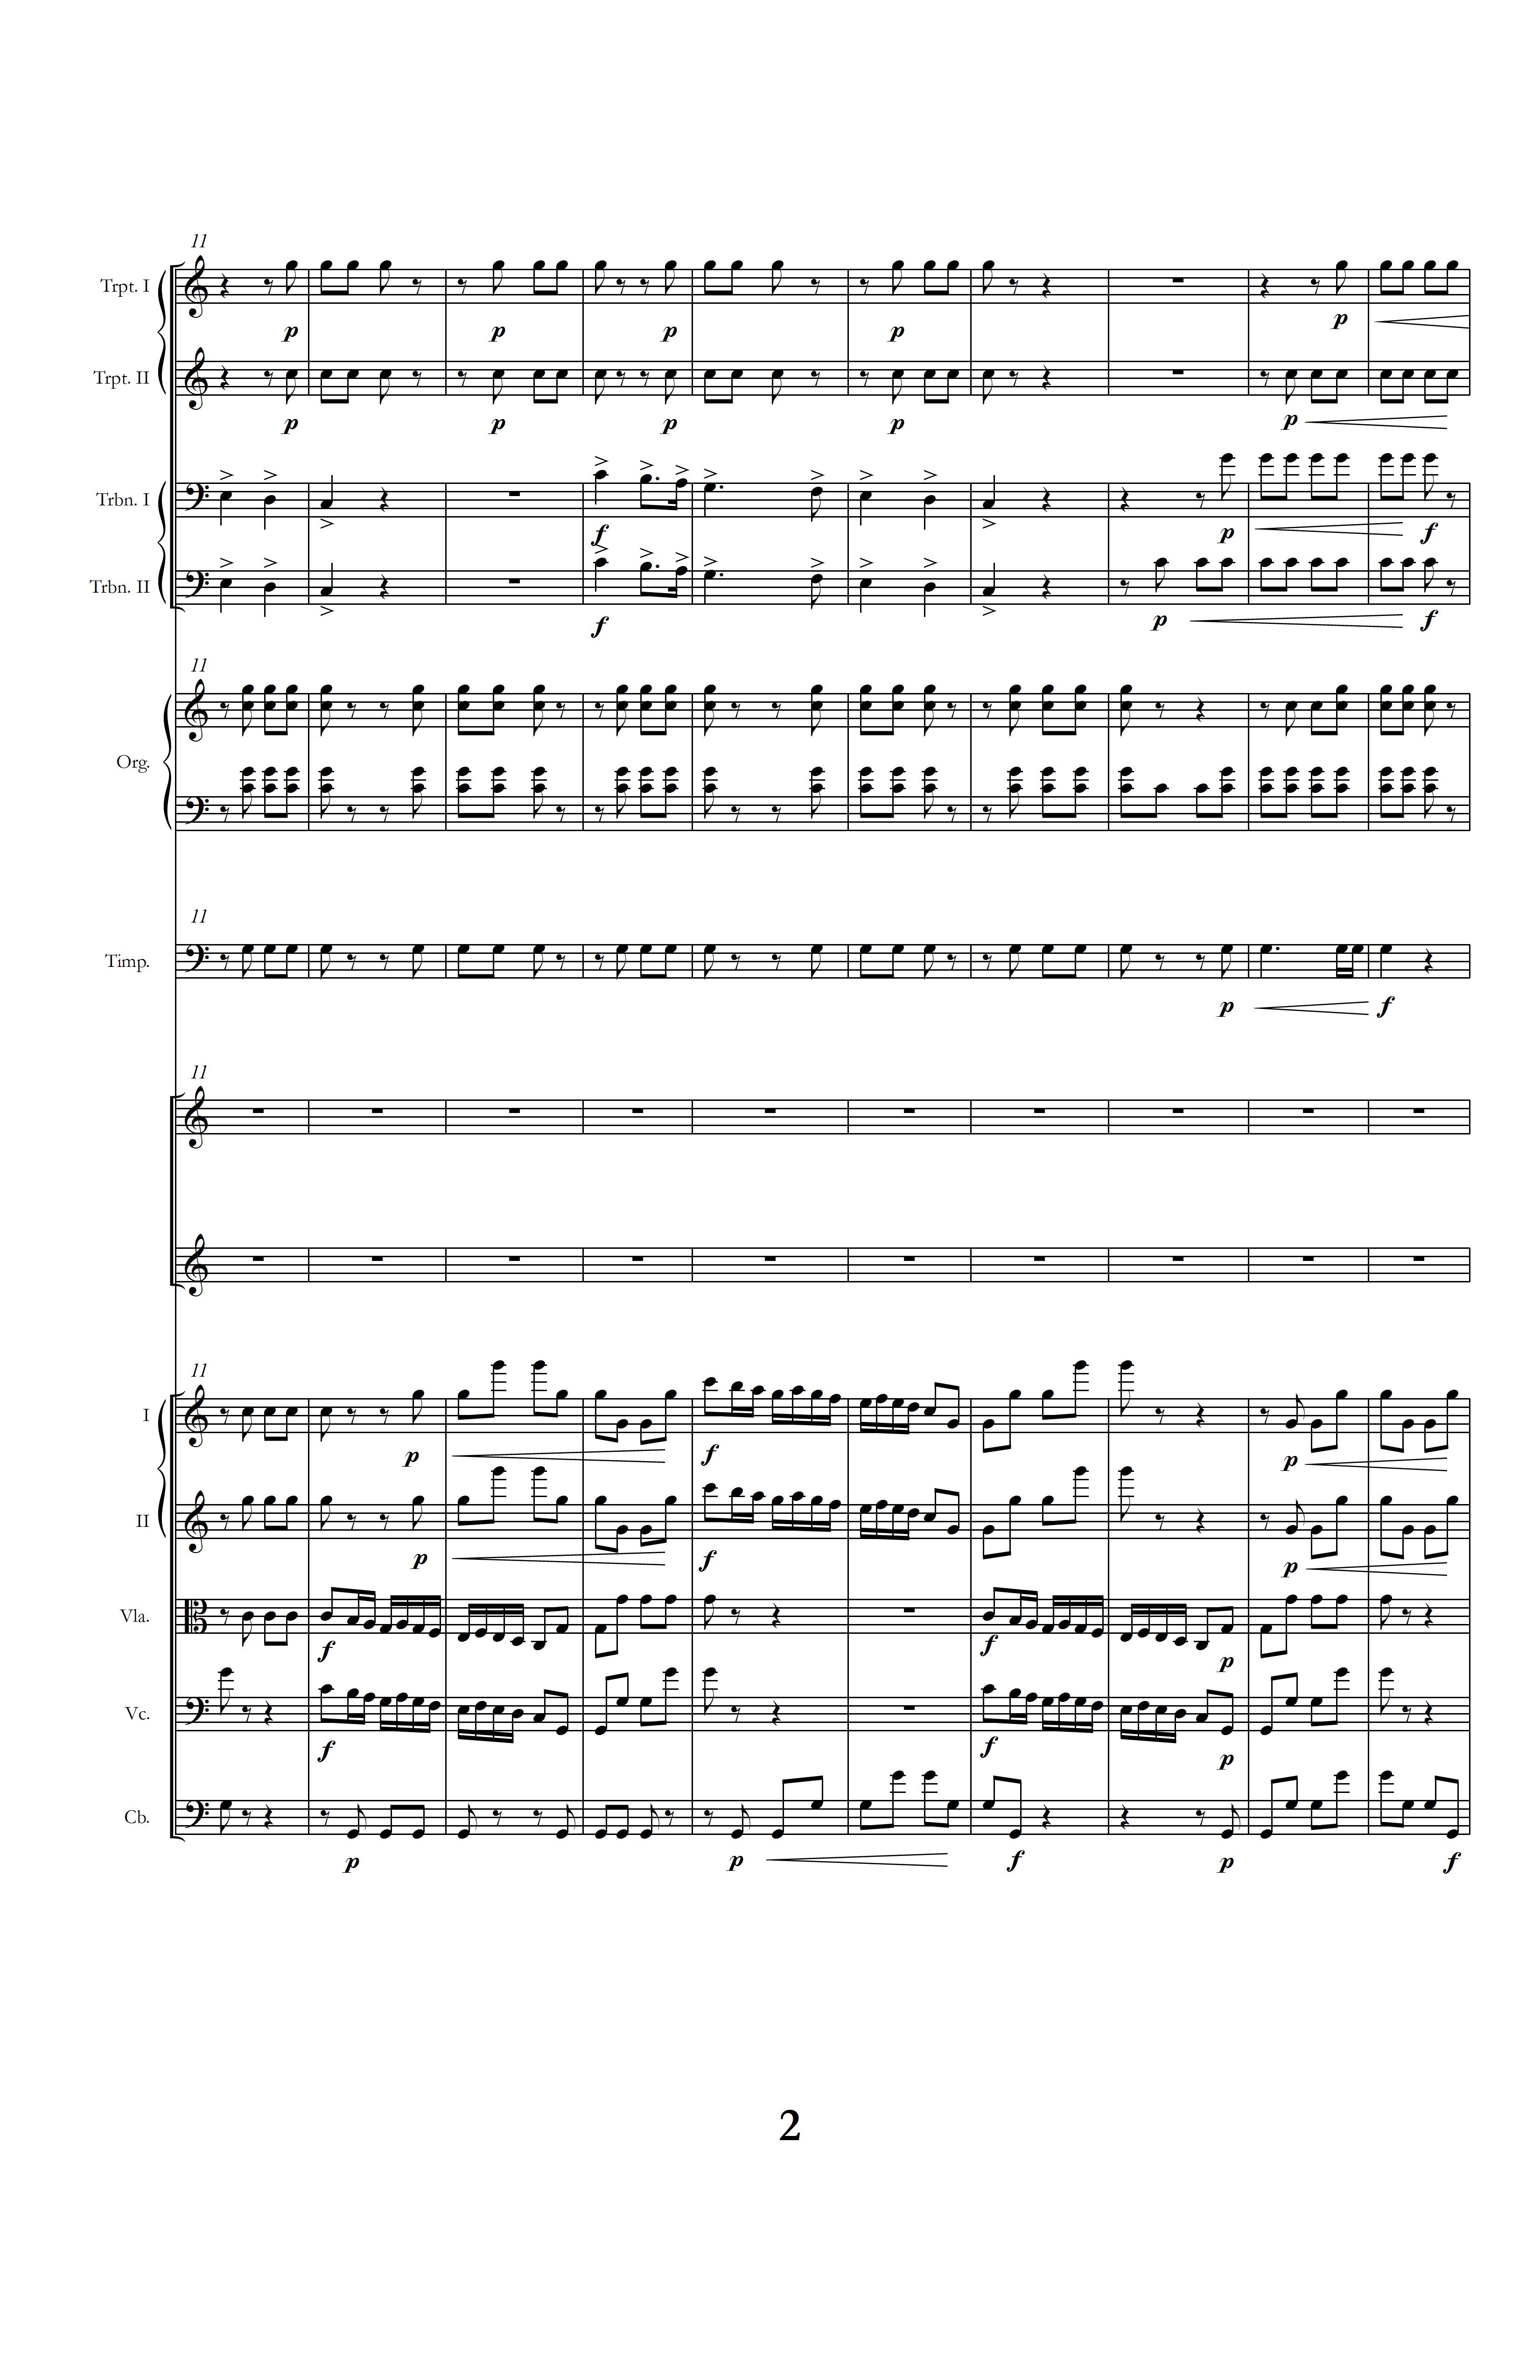 "Joy to the World! (ANTIOCH)" score, page 2